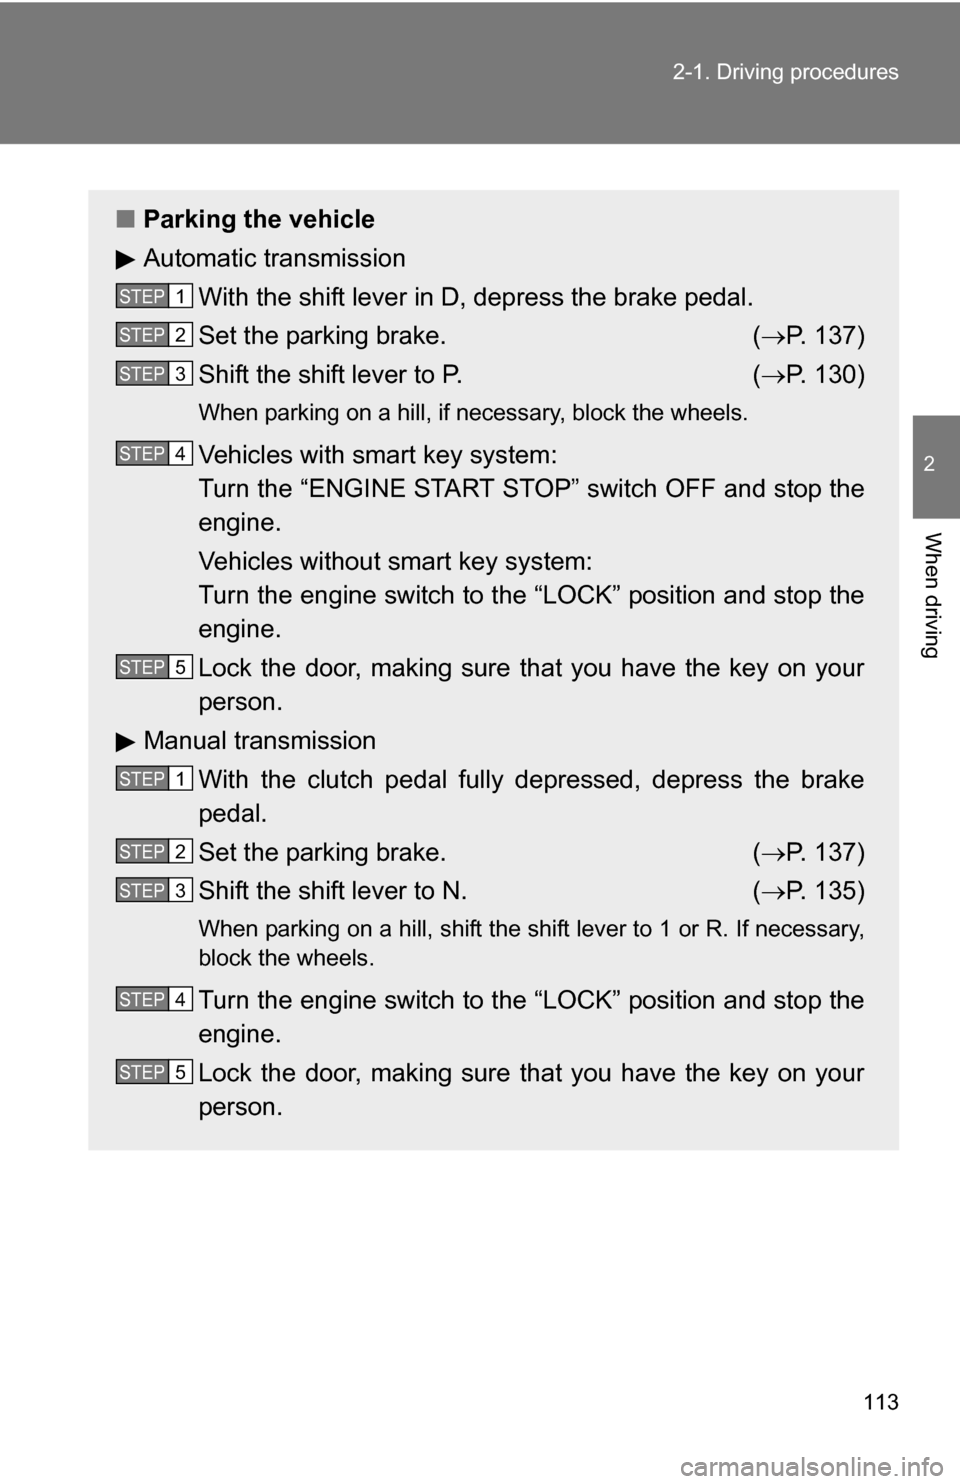 TOYOTA COROLLA 2009 10.G Owners Manual 113
2-1. Driving procedures
2
When driving
■
Parking the vehicle
Automatic transmission
With the shift lever in D, depress the brake pedal.
Set the parking brake. ( P. 137)
Shift the shift lever 